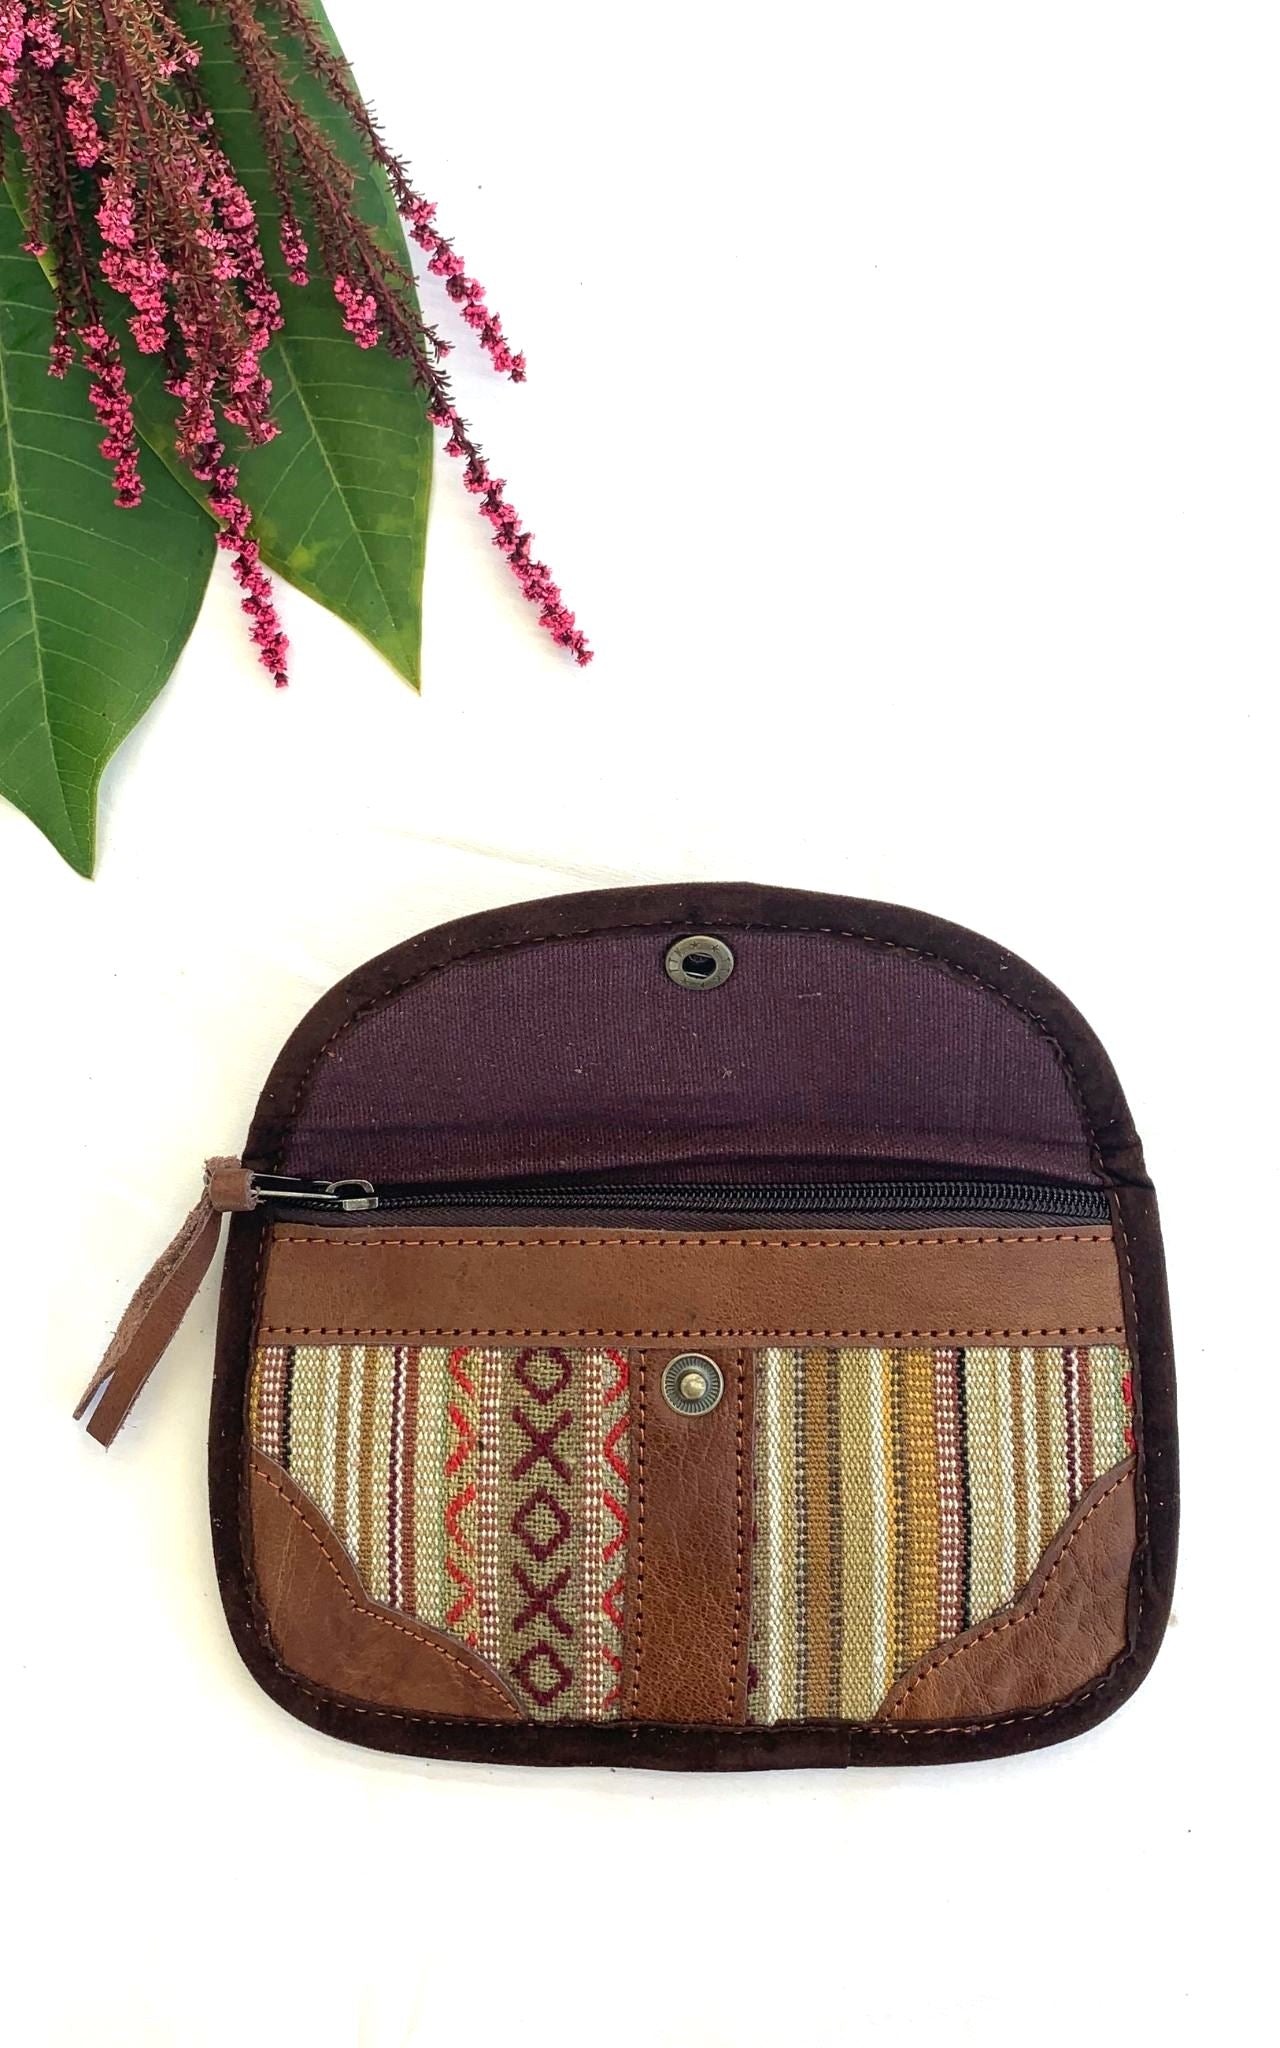 Surya AUstralia Ethical Buffalo Leather + Woven Cotton Clutch Wallets from Nepal - Interior